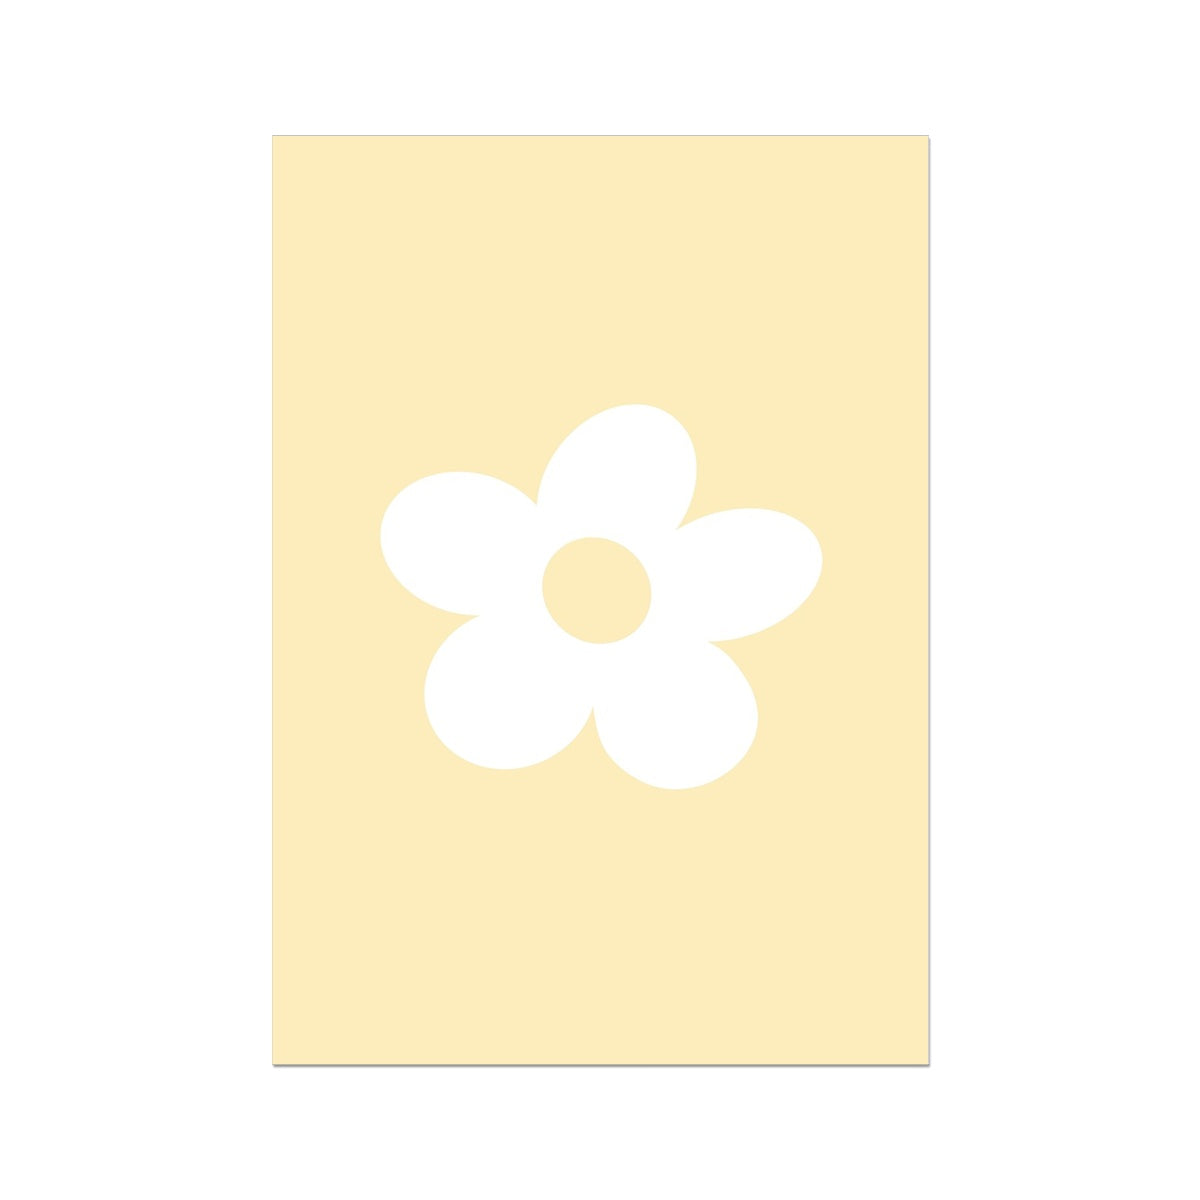 © les muses / Daisy is a collection of danish pastel wall art full of retro daisies.The aesthetic art prints feature a simple design of a single daisy in an array of dreamy pastels.  A trendy flower poster perfect as apartment and dorm decor. 